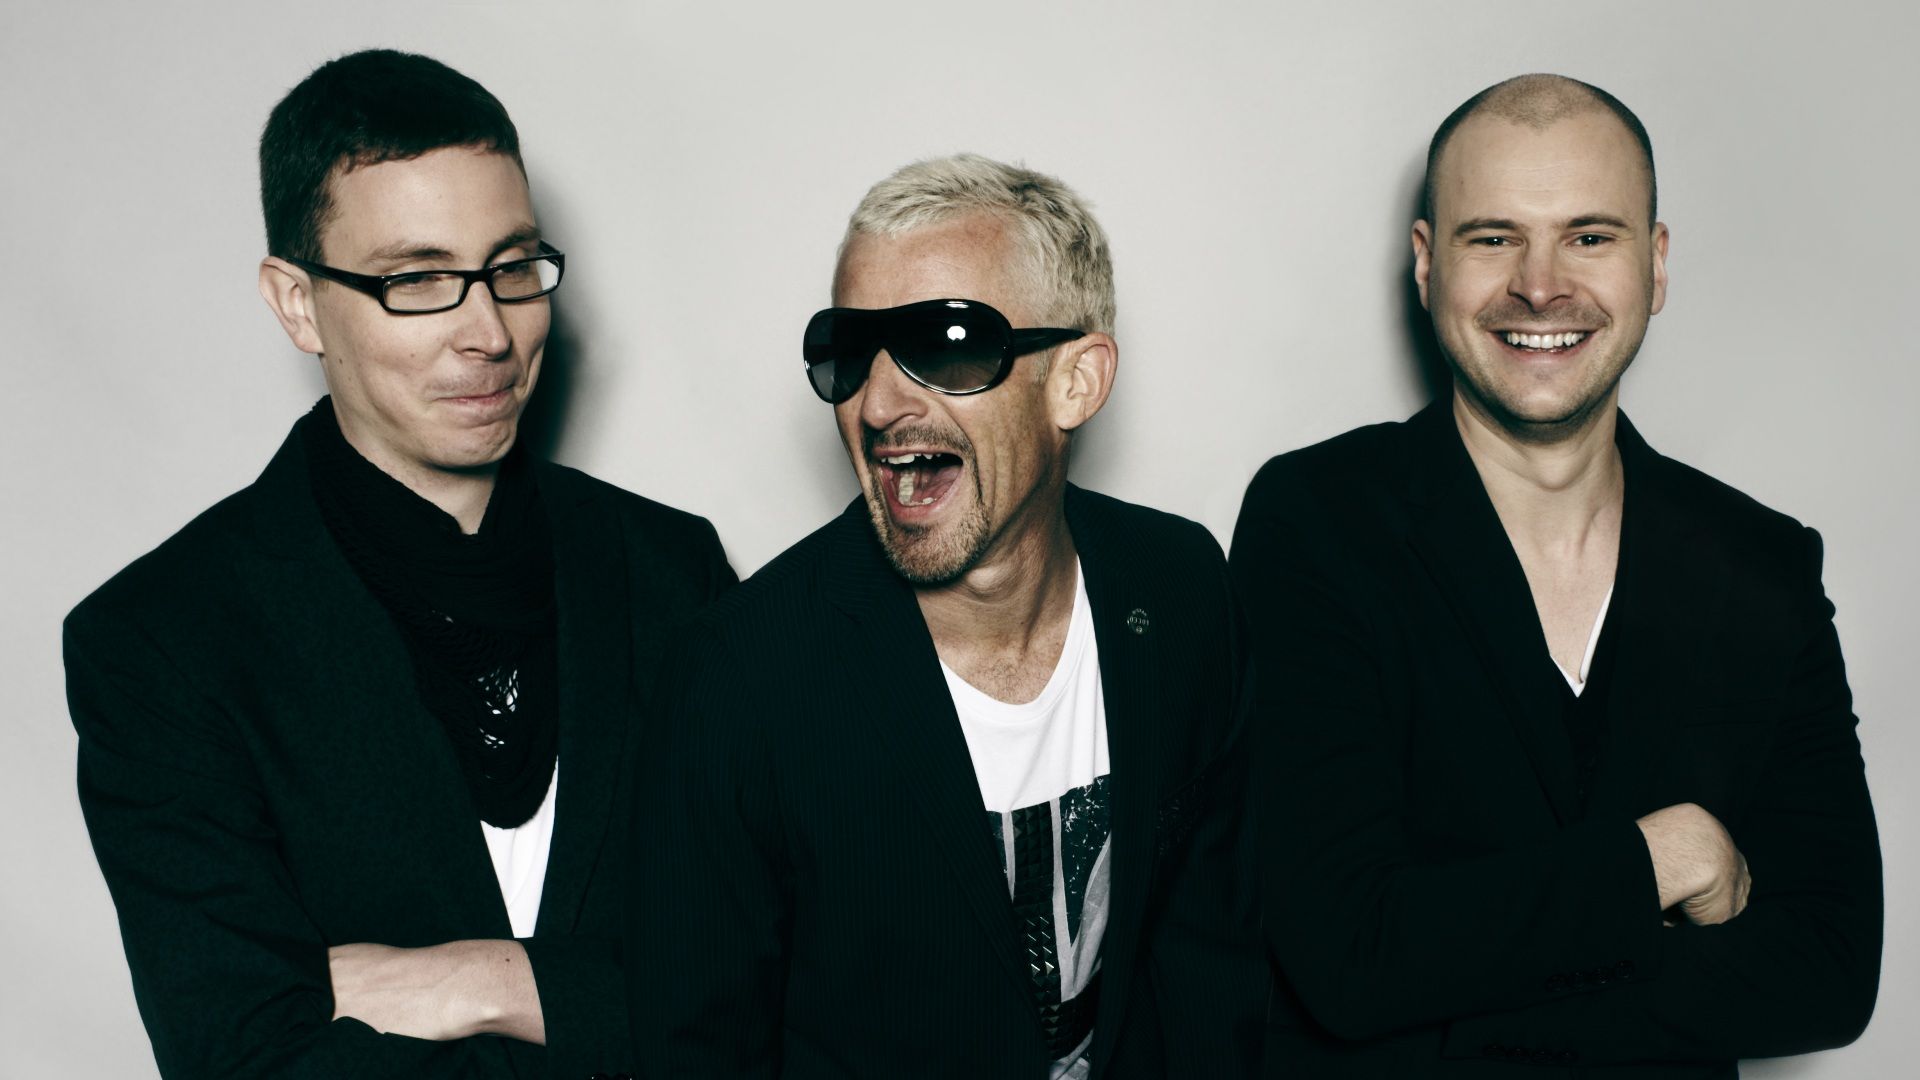 Above & Beyond's 'Common Ground' album turns 2 years old